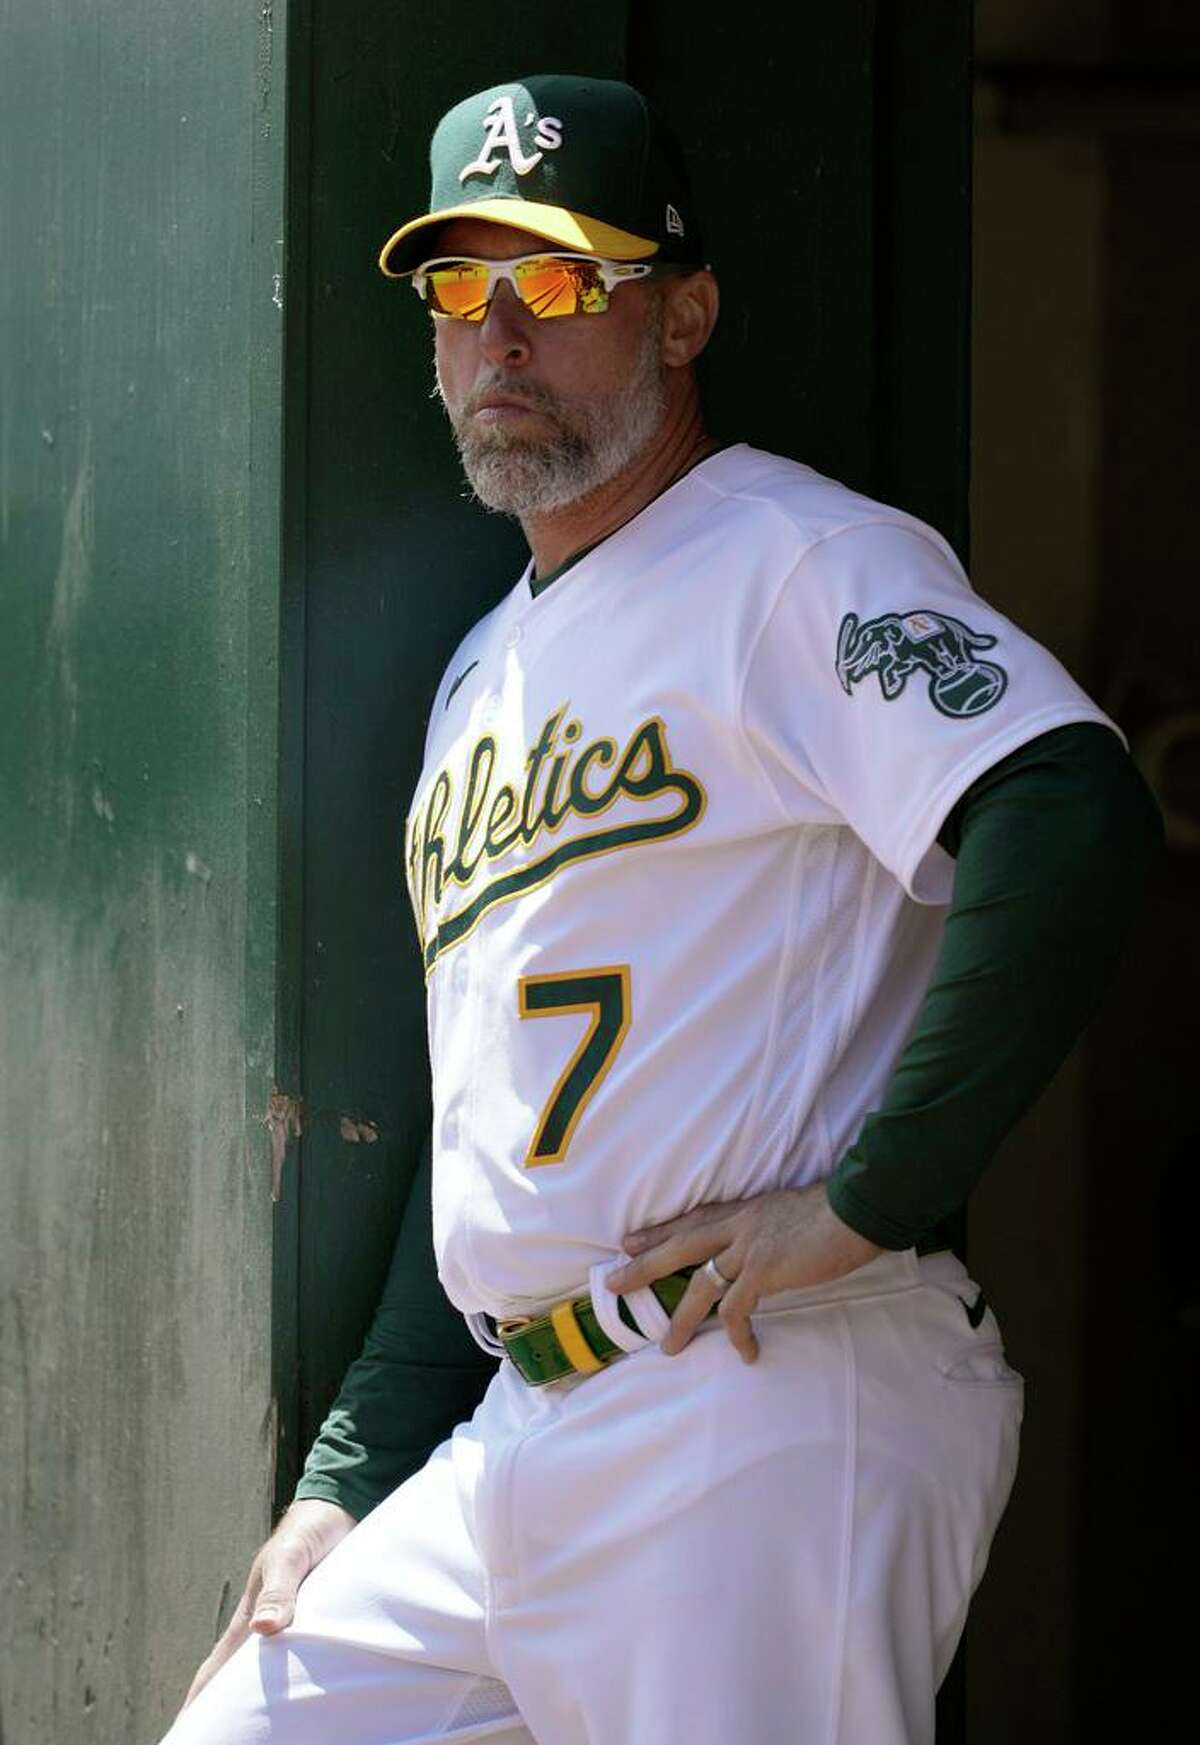 OAKLAND, CALIFORNIA - AUGUST 04: Third base coach Mark Kotsay #7 of the Oakland Athletics looks on from the dugout against the San Diego Padres in the top of the first inning at RingCentral Coliseum on August 04, 2021 in Oakland, California.